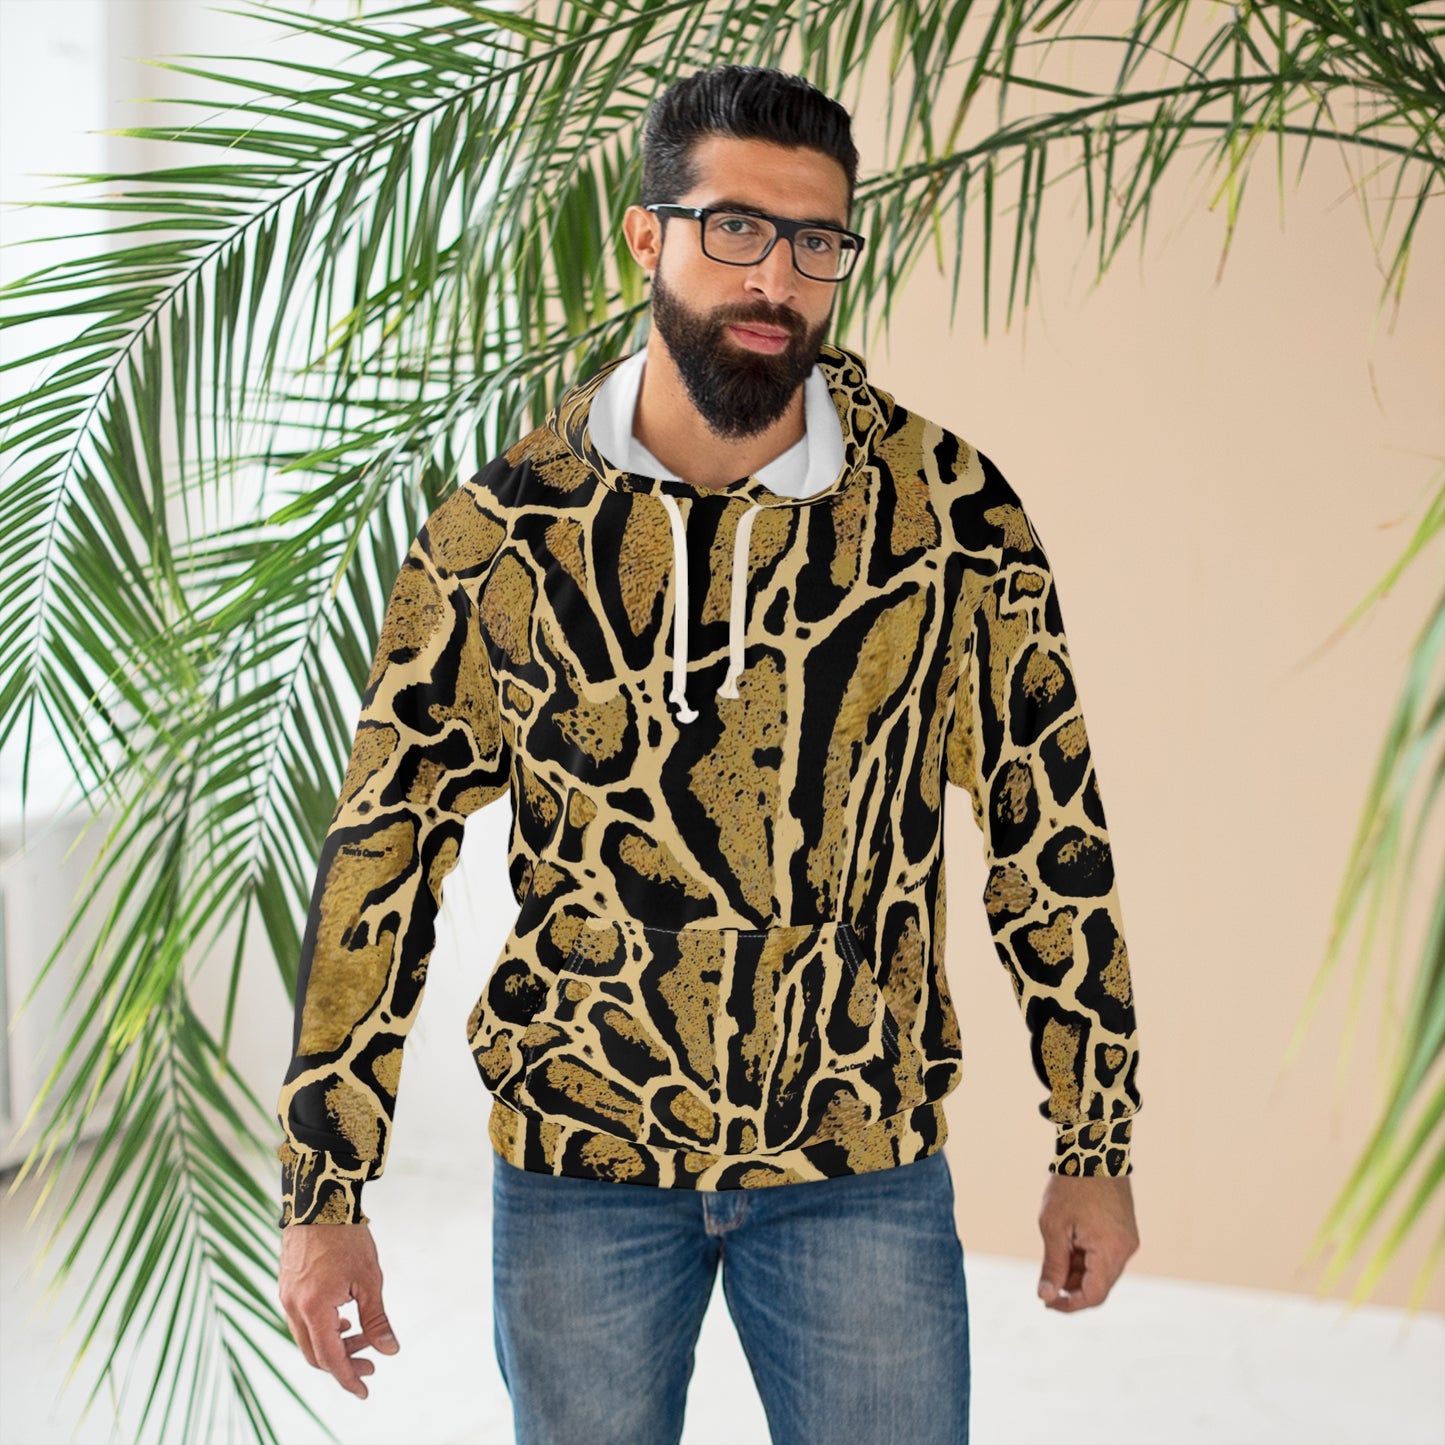 Clouded Leopard Unisex Pullover Hoodie